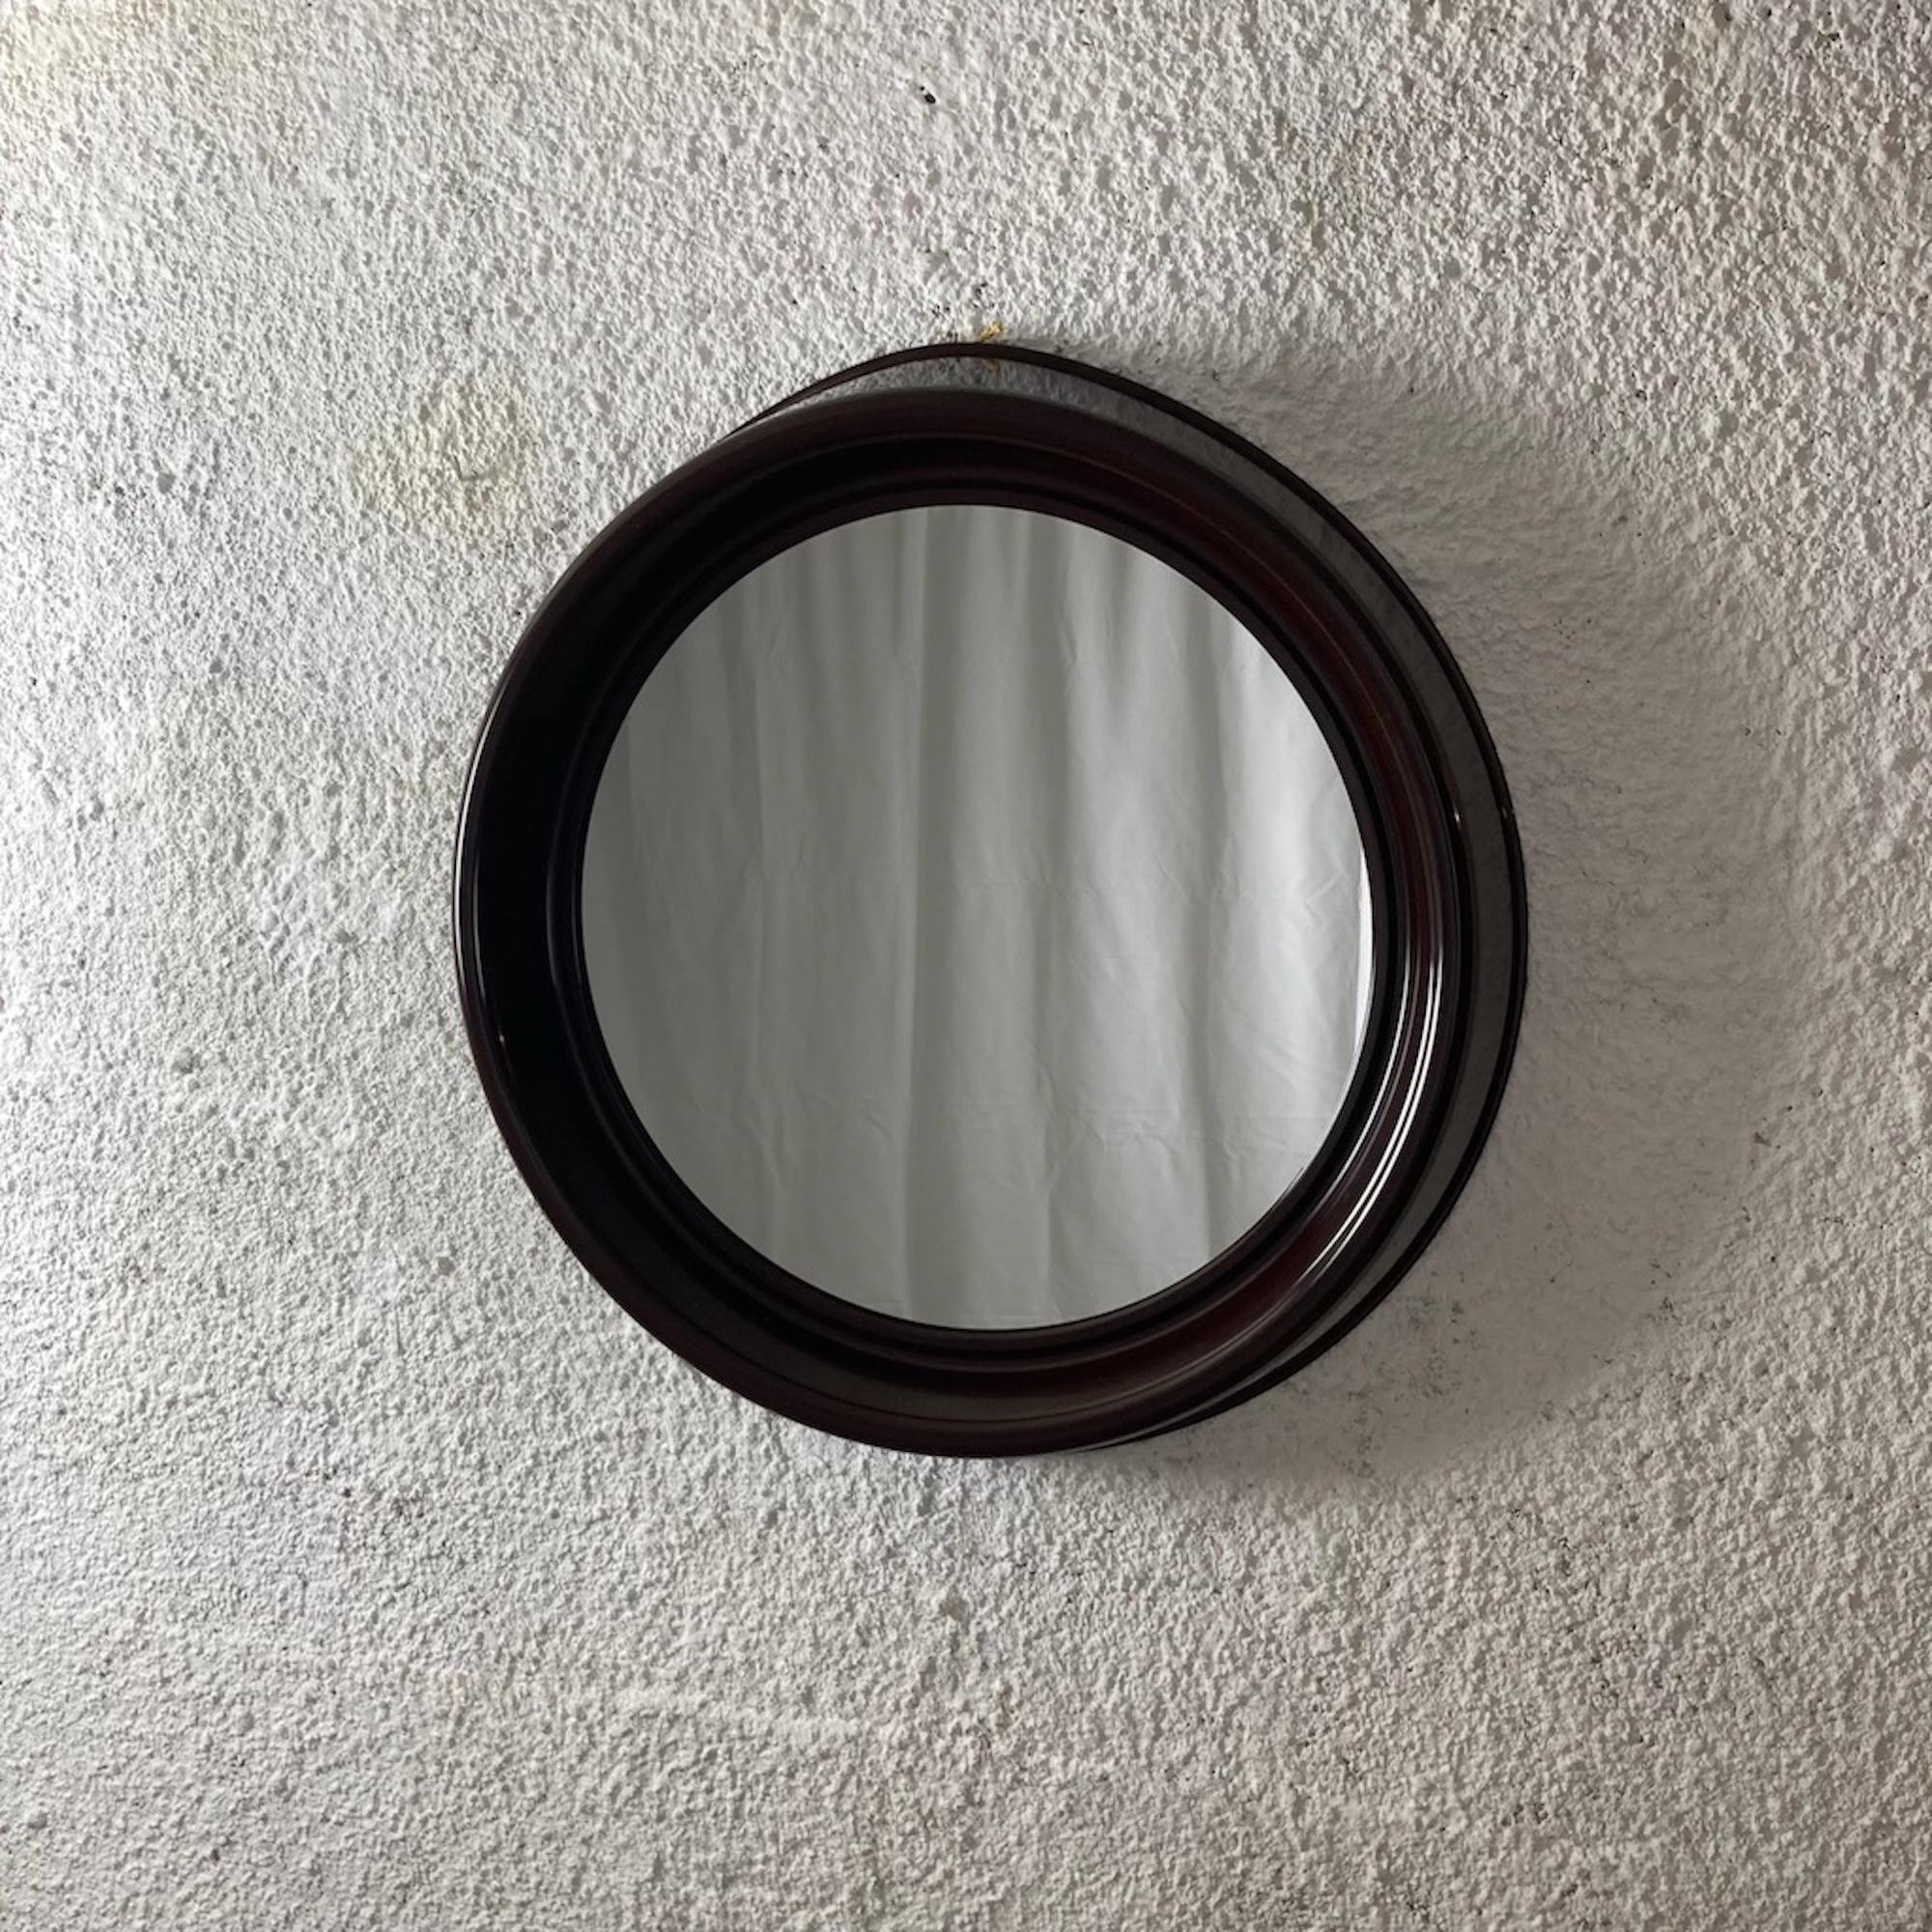 Rare chocolate brown wall mirror produced by the renowned italian maker Dal Vera, Conegliano in the 70s.

The quality and thickness of the circular plastic body is simply unobtainable, a signature of the italian brand. The 70s typical brown finish